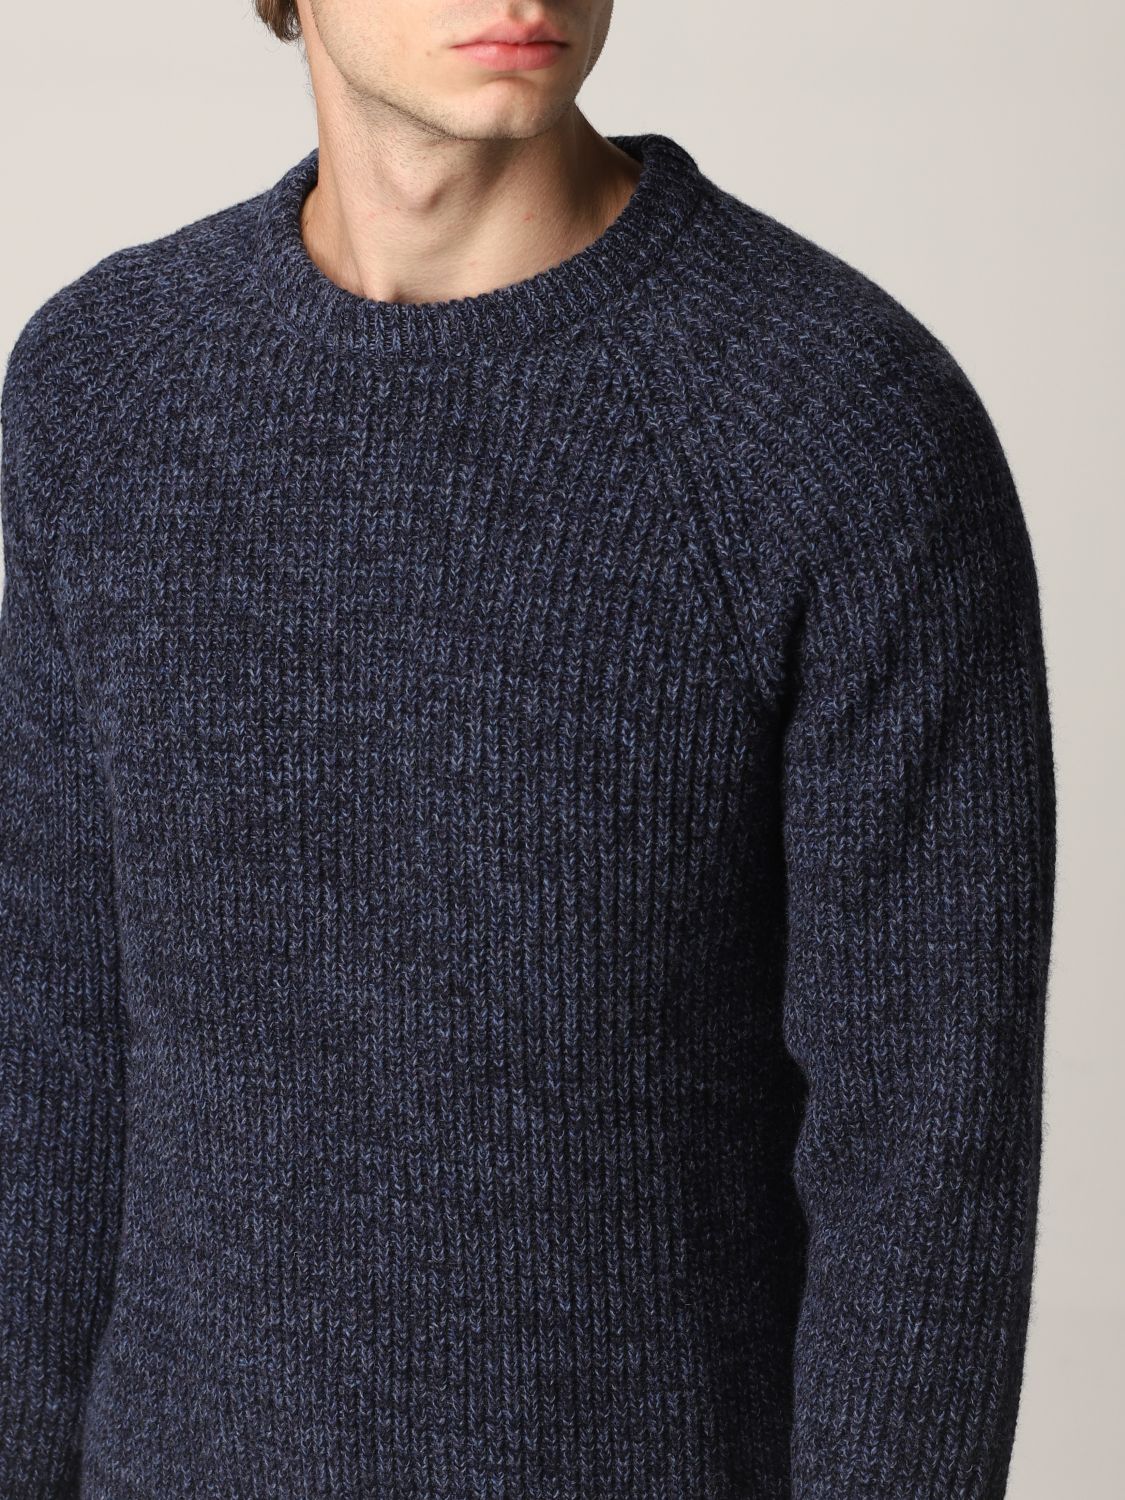 BARBOUR: sweater for man - Navy | Barbour sweater MKN1113 MKN online on ...